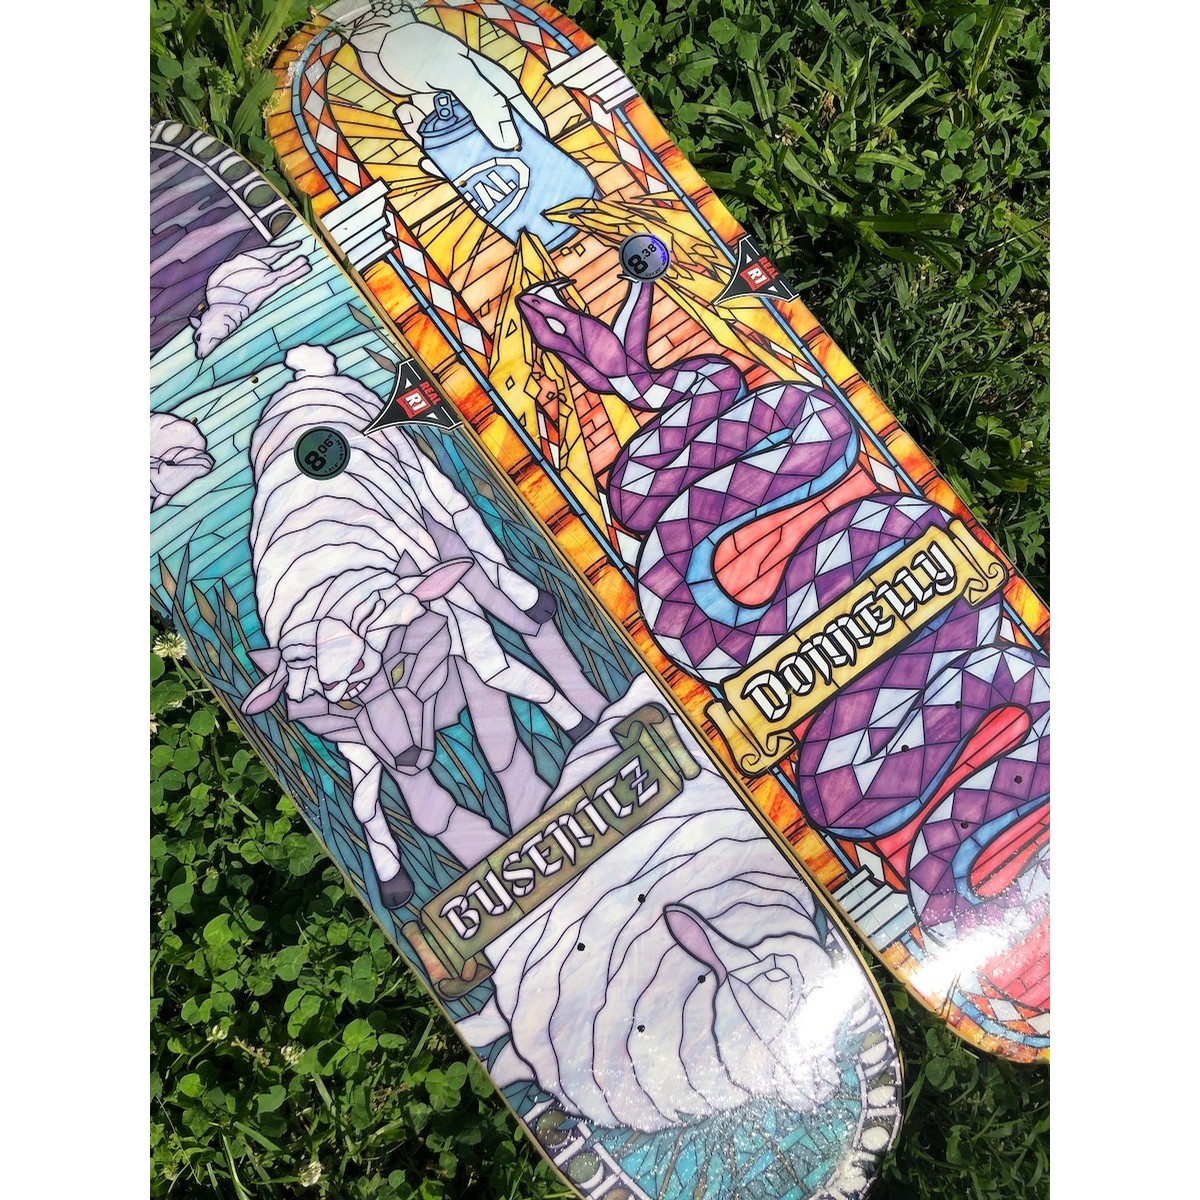 8.50/" Multi Real Zion Cathedral Skateboard Deck